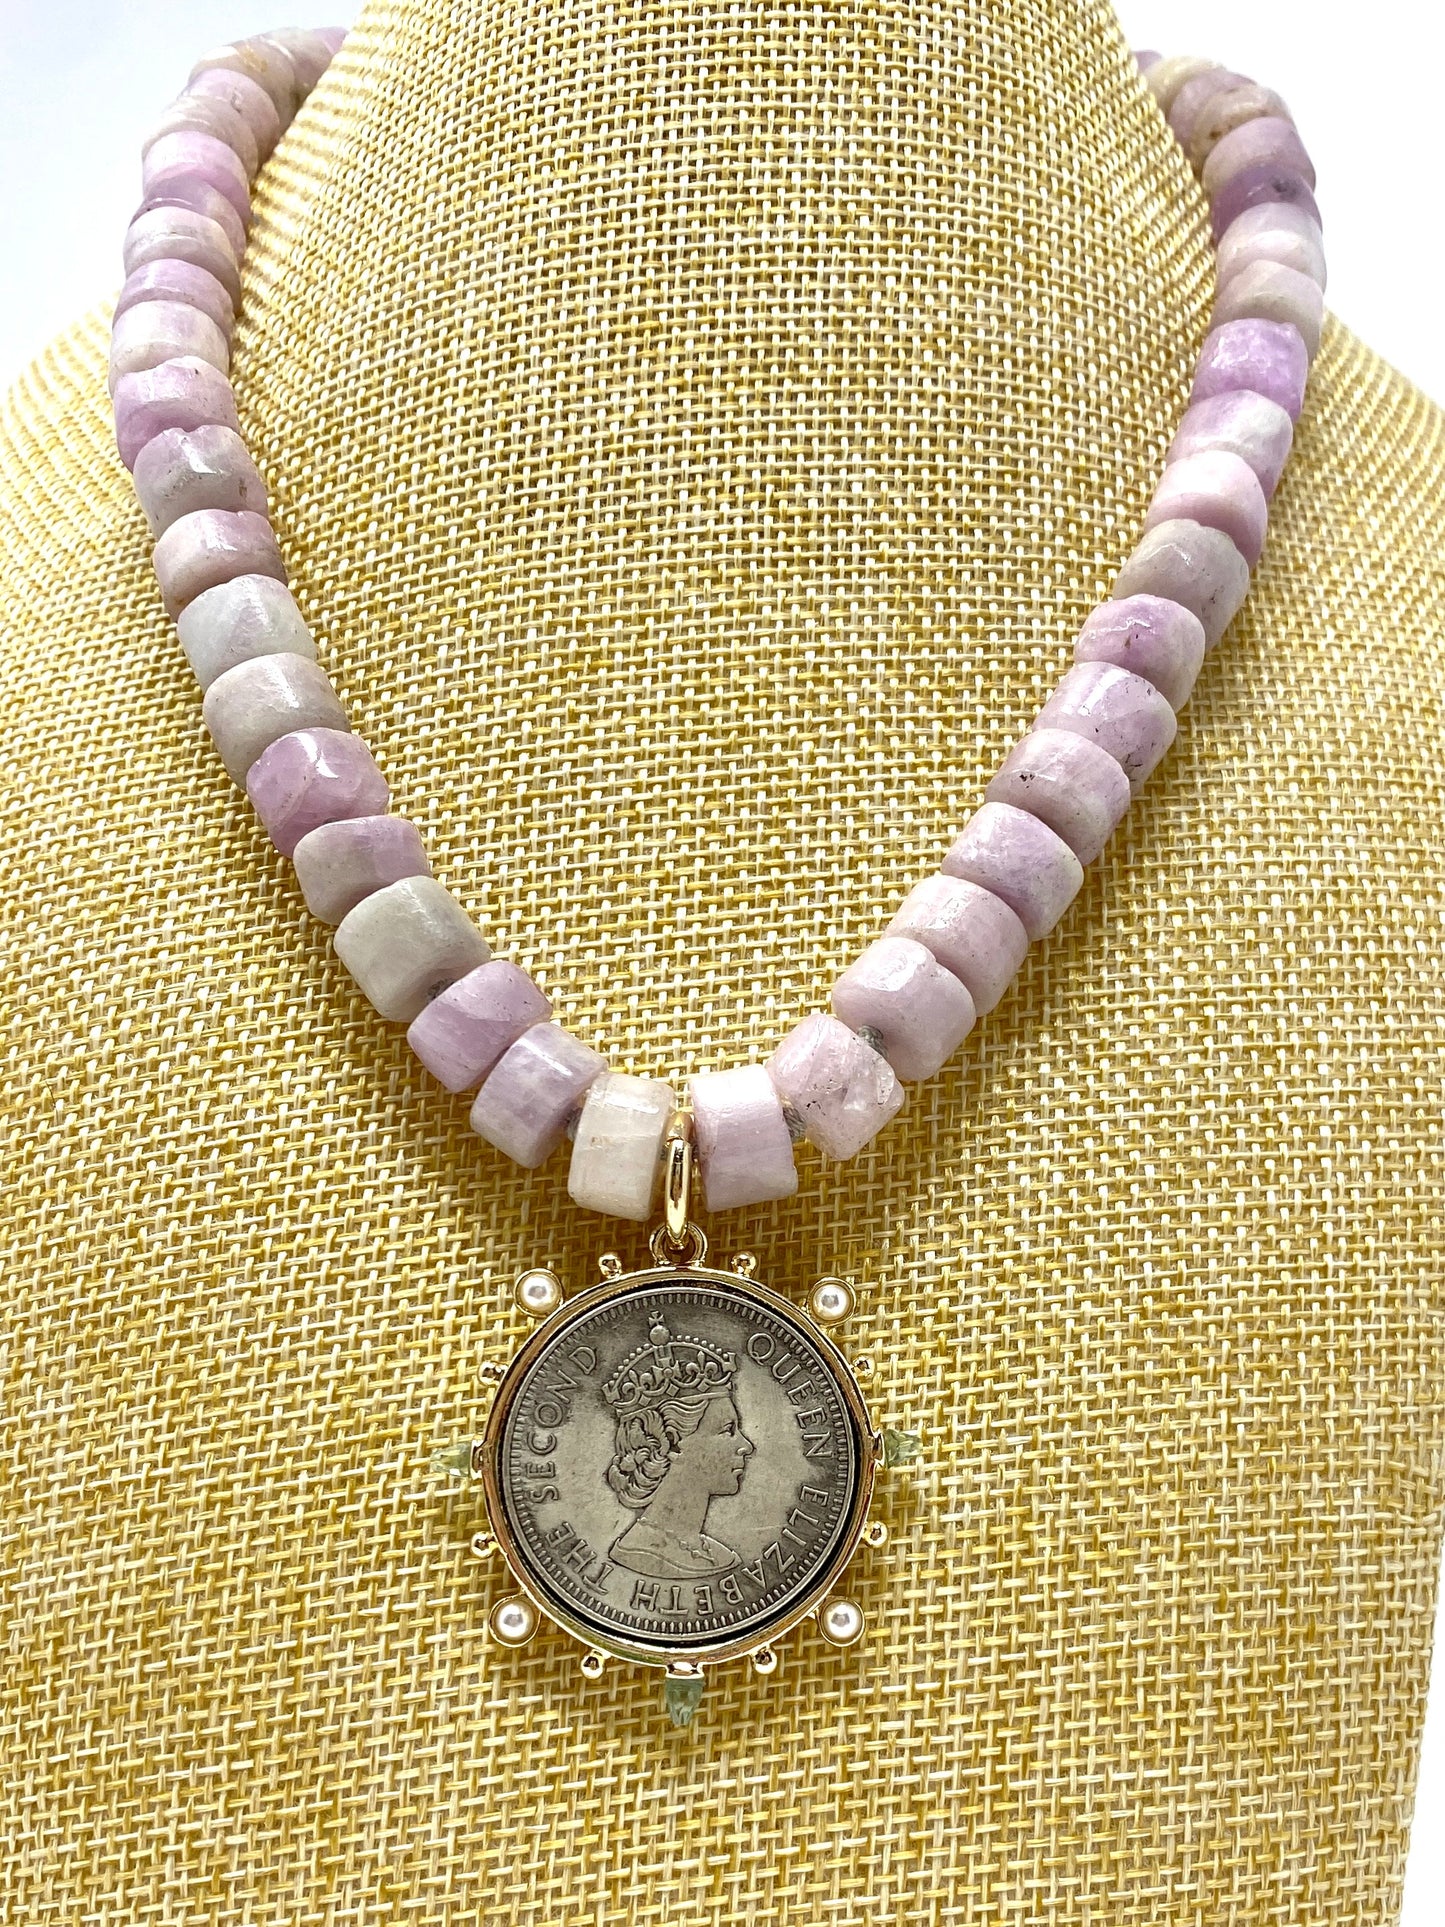 Lavender Kunzite Handknotted Necklace With Jeweled Queen Elizabeth II Vintage Coin Pendant